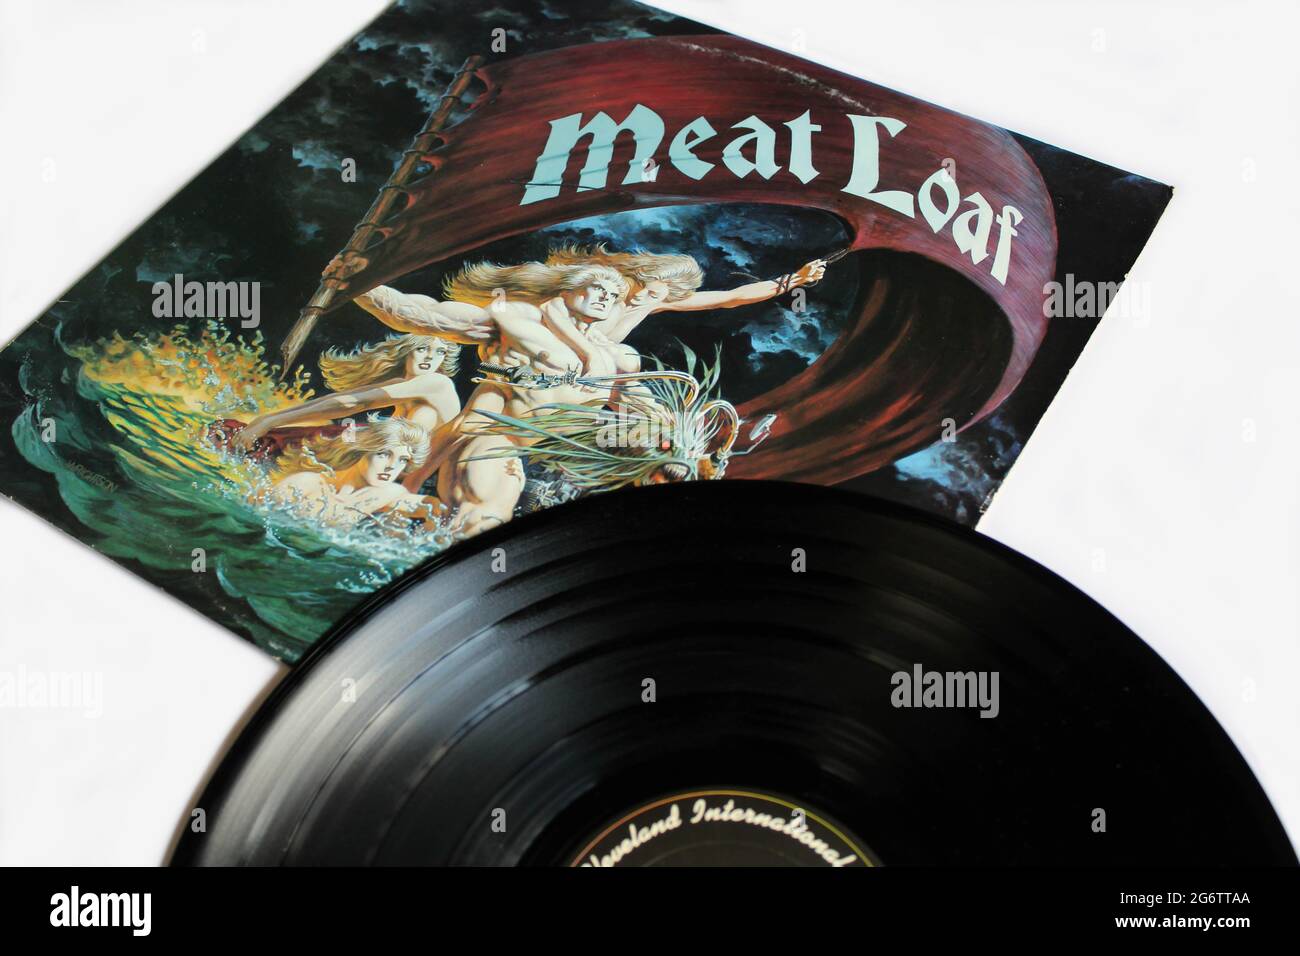 Dead Ringer is a studio album by hard rock band Meat Loaf. Michael Lee Aday better known as Meat Loaf, is an American singer and actor. Album cover Stock Photo